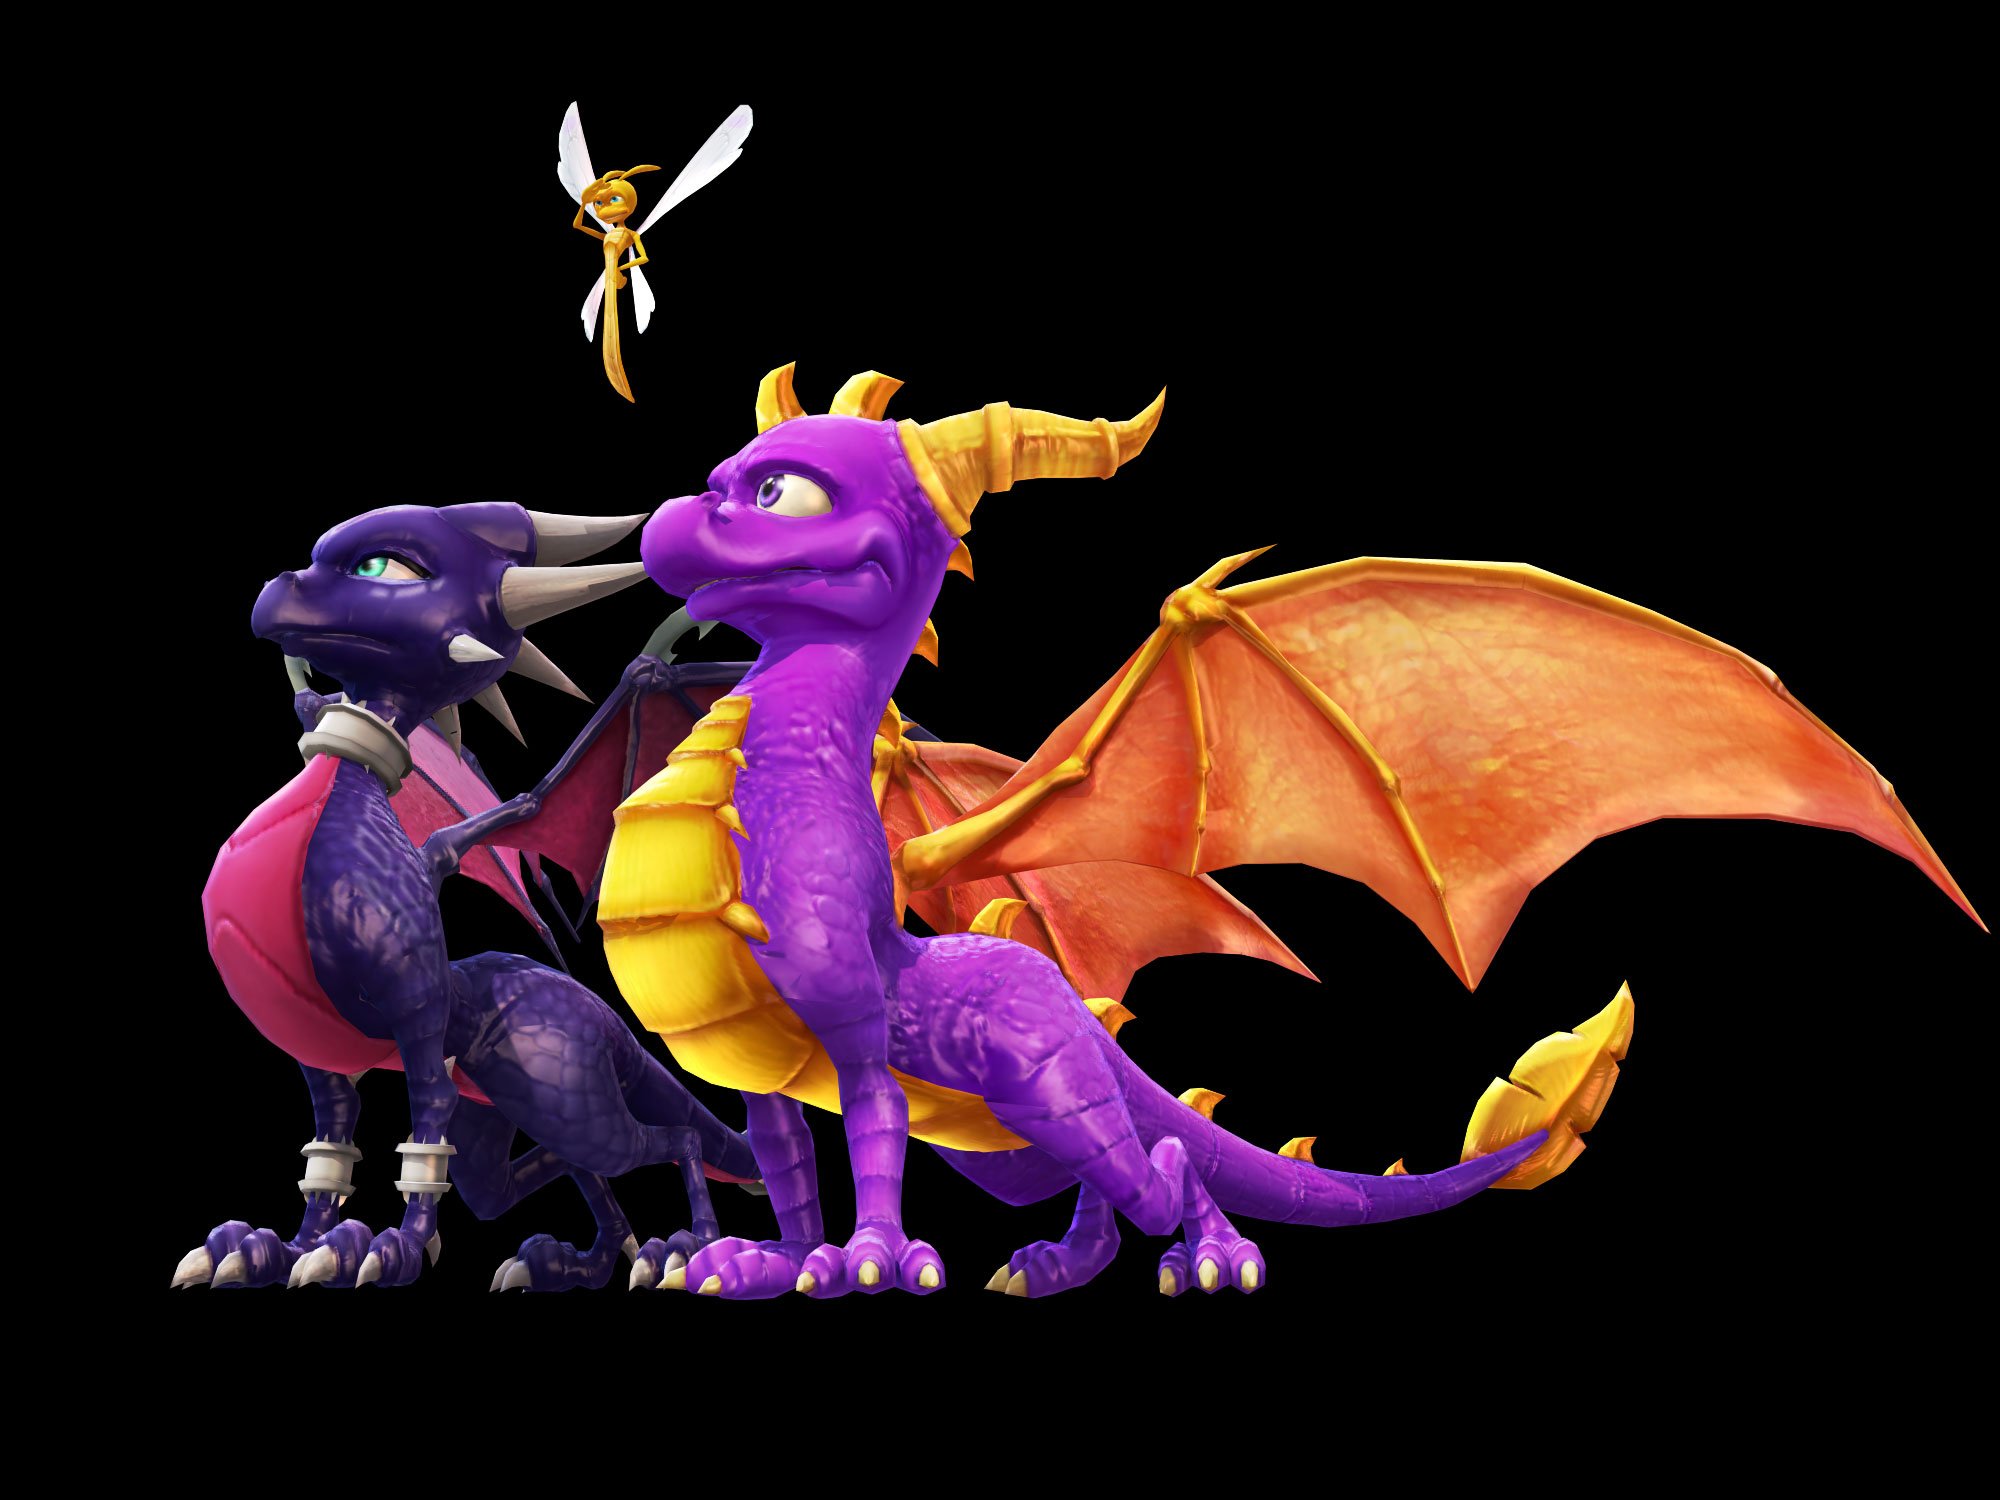 Video Game The Legend of Spyro: Dawn of the Dragon HD Wallpaper | Background Image